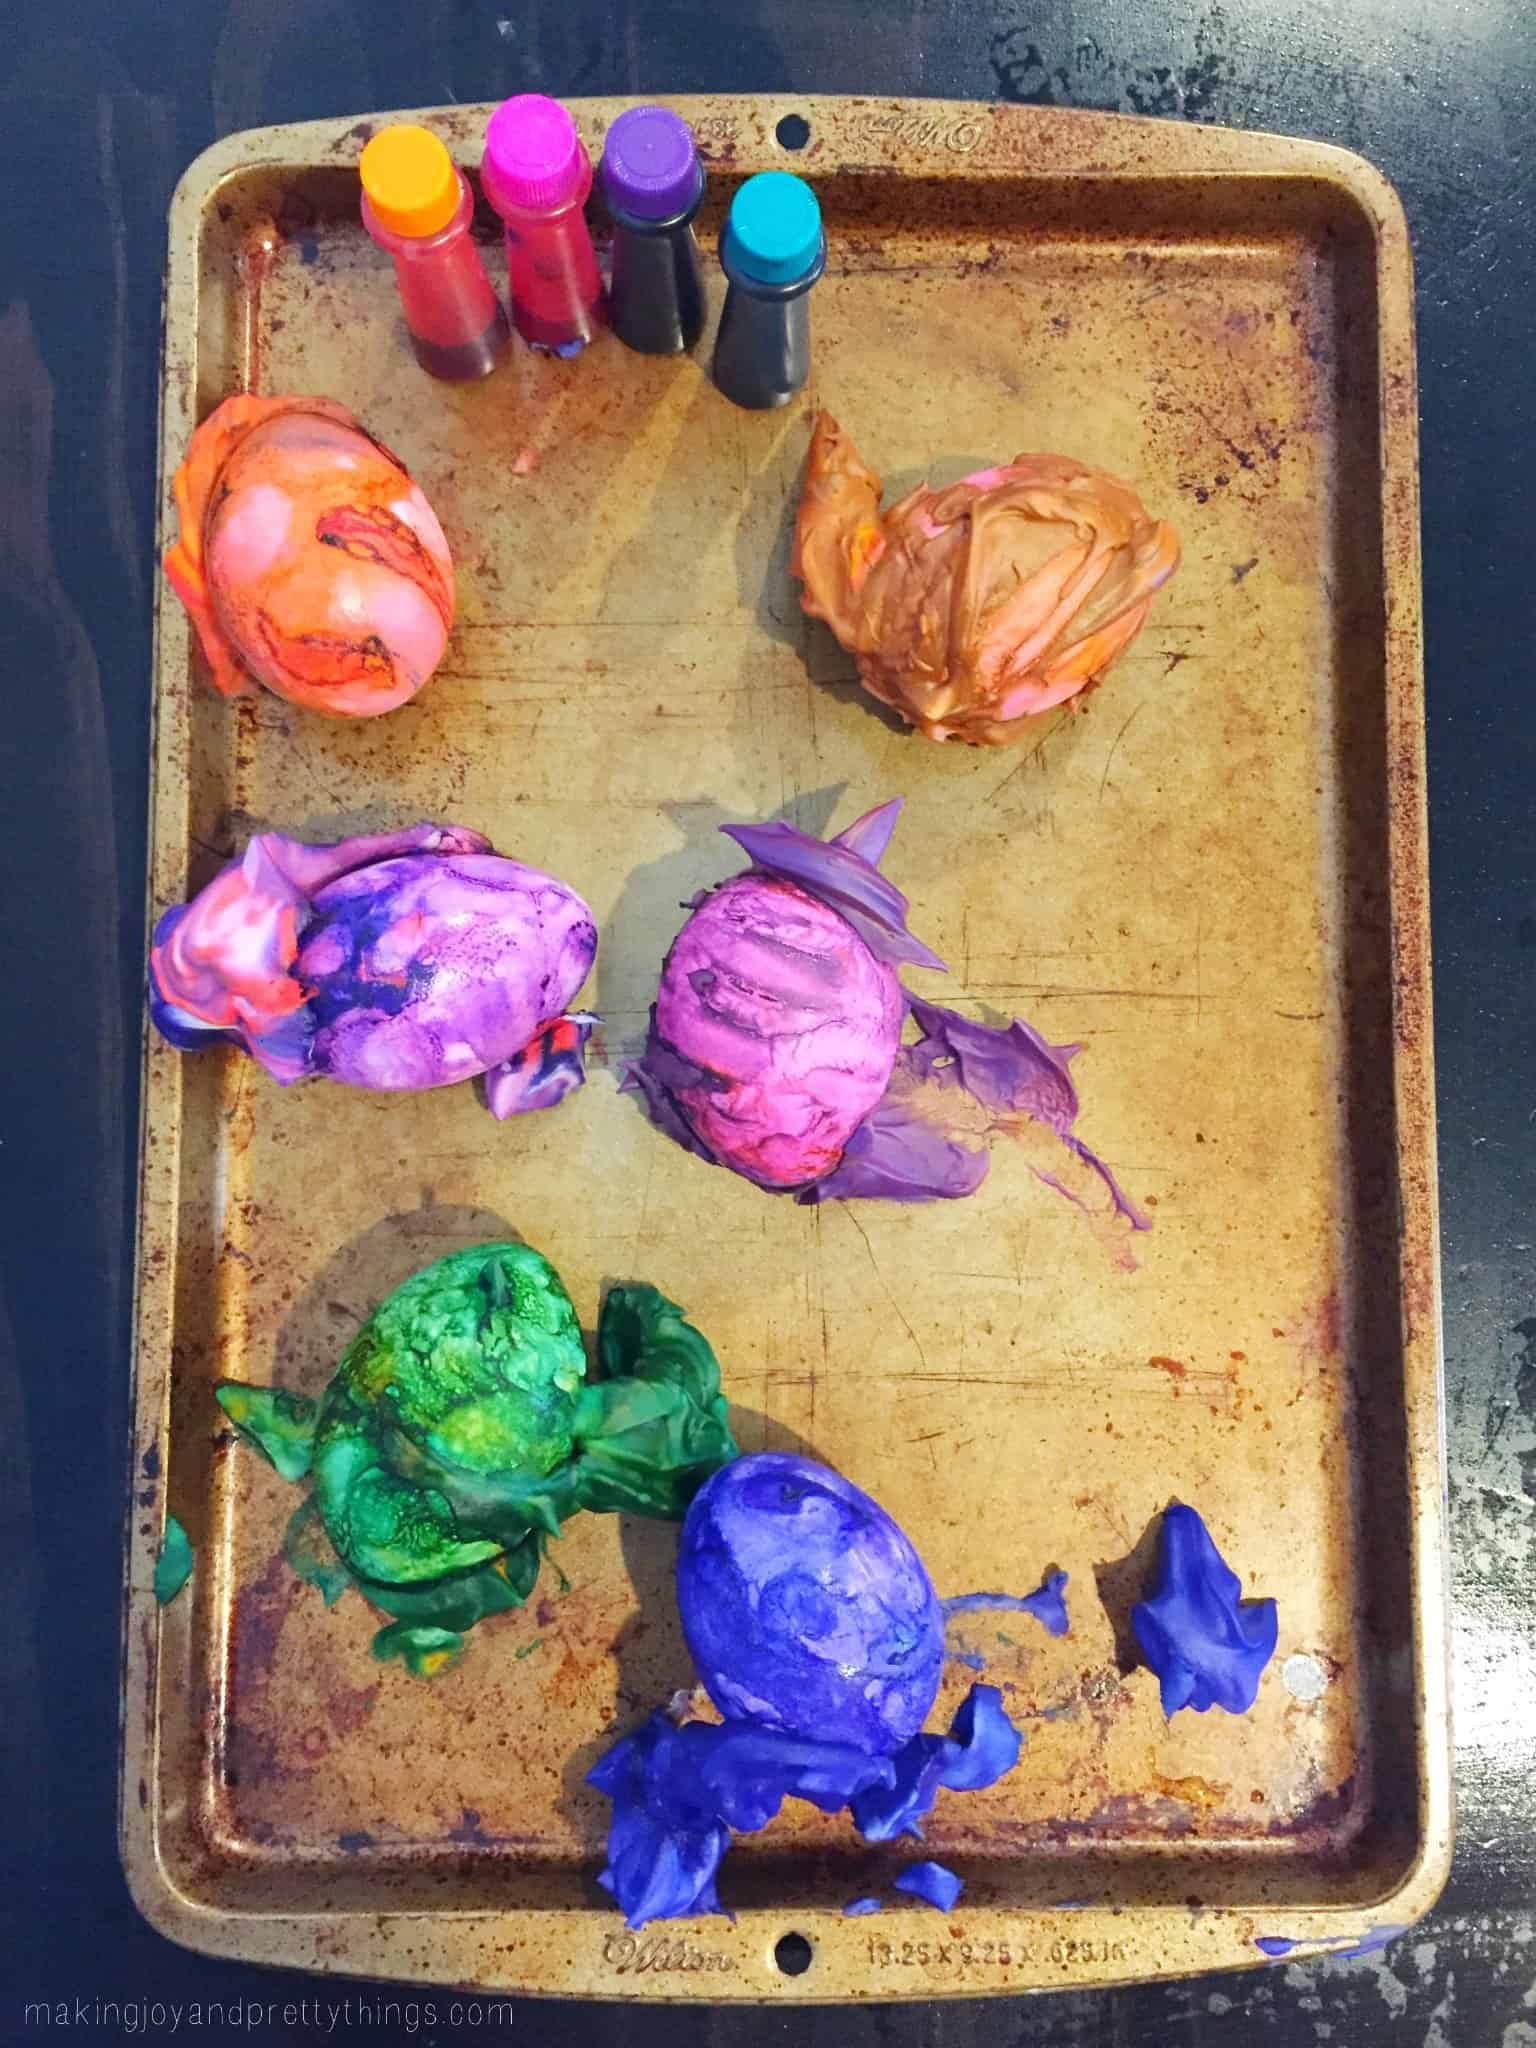 Six eggs covered in blue, green, purple, and pink shaving cream sit on an aluminum baking sheet. The dyed shaving cream covering the eggs has been wiped off, revealing colorful dyed eggs.